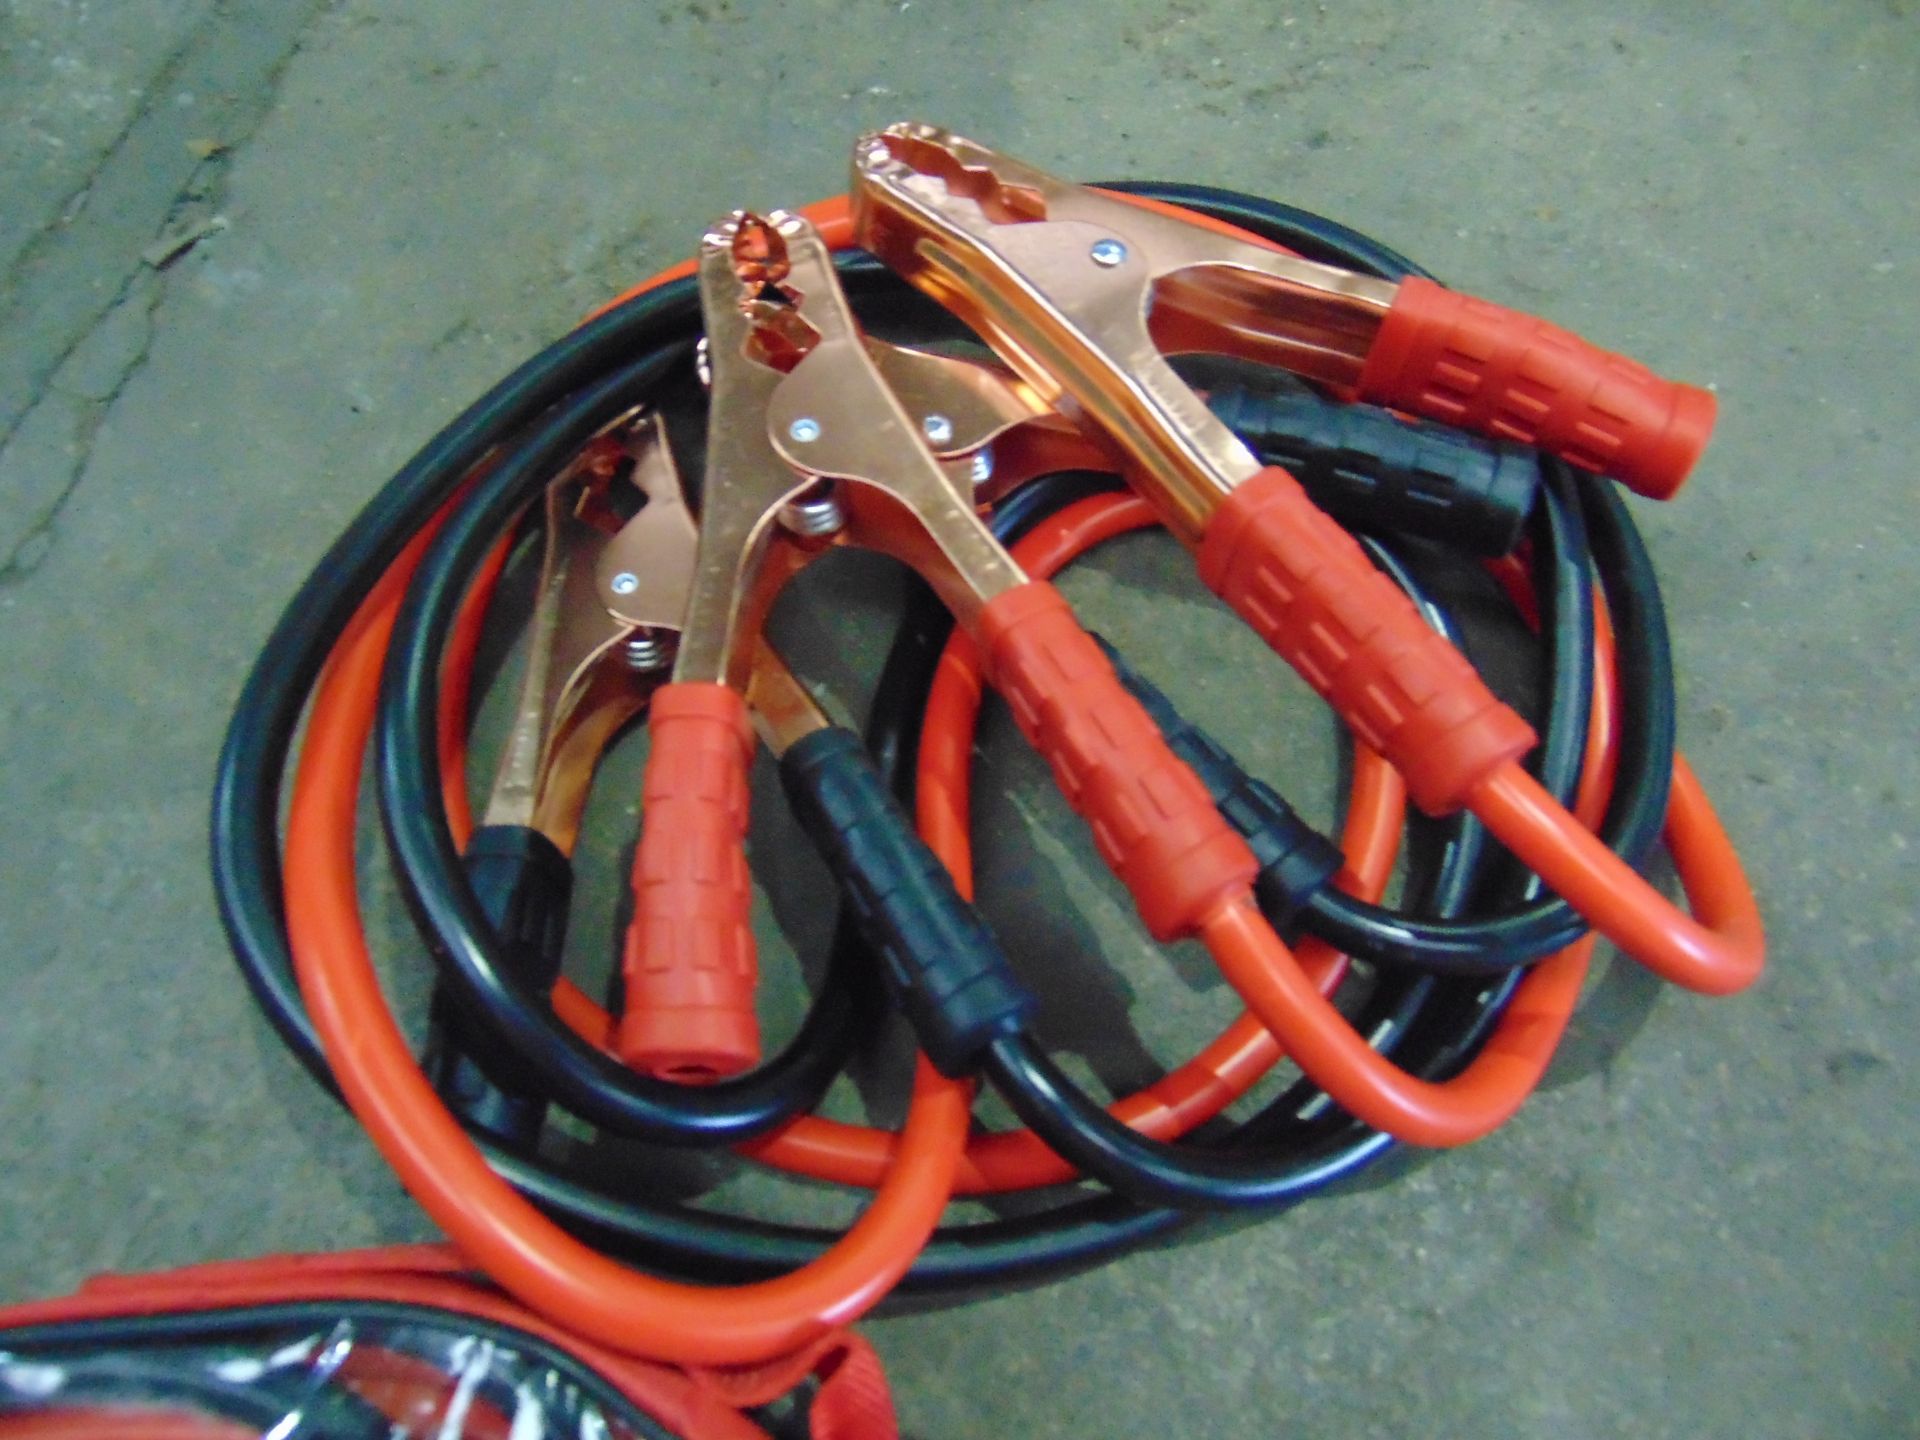 2 x UNISSUED Heavy Duty 100AMP Booster Jump Start Cable Sets. - Image 3 of 3